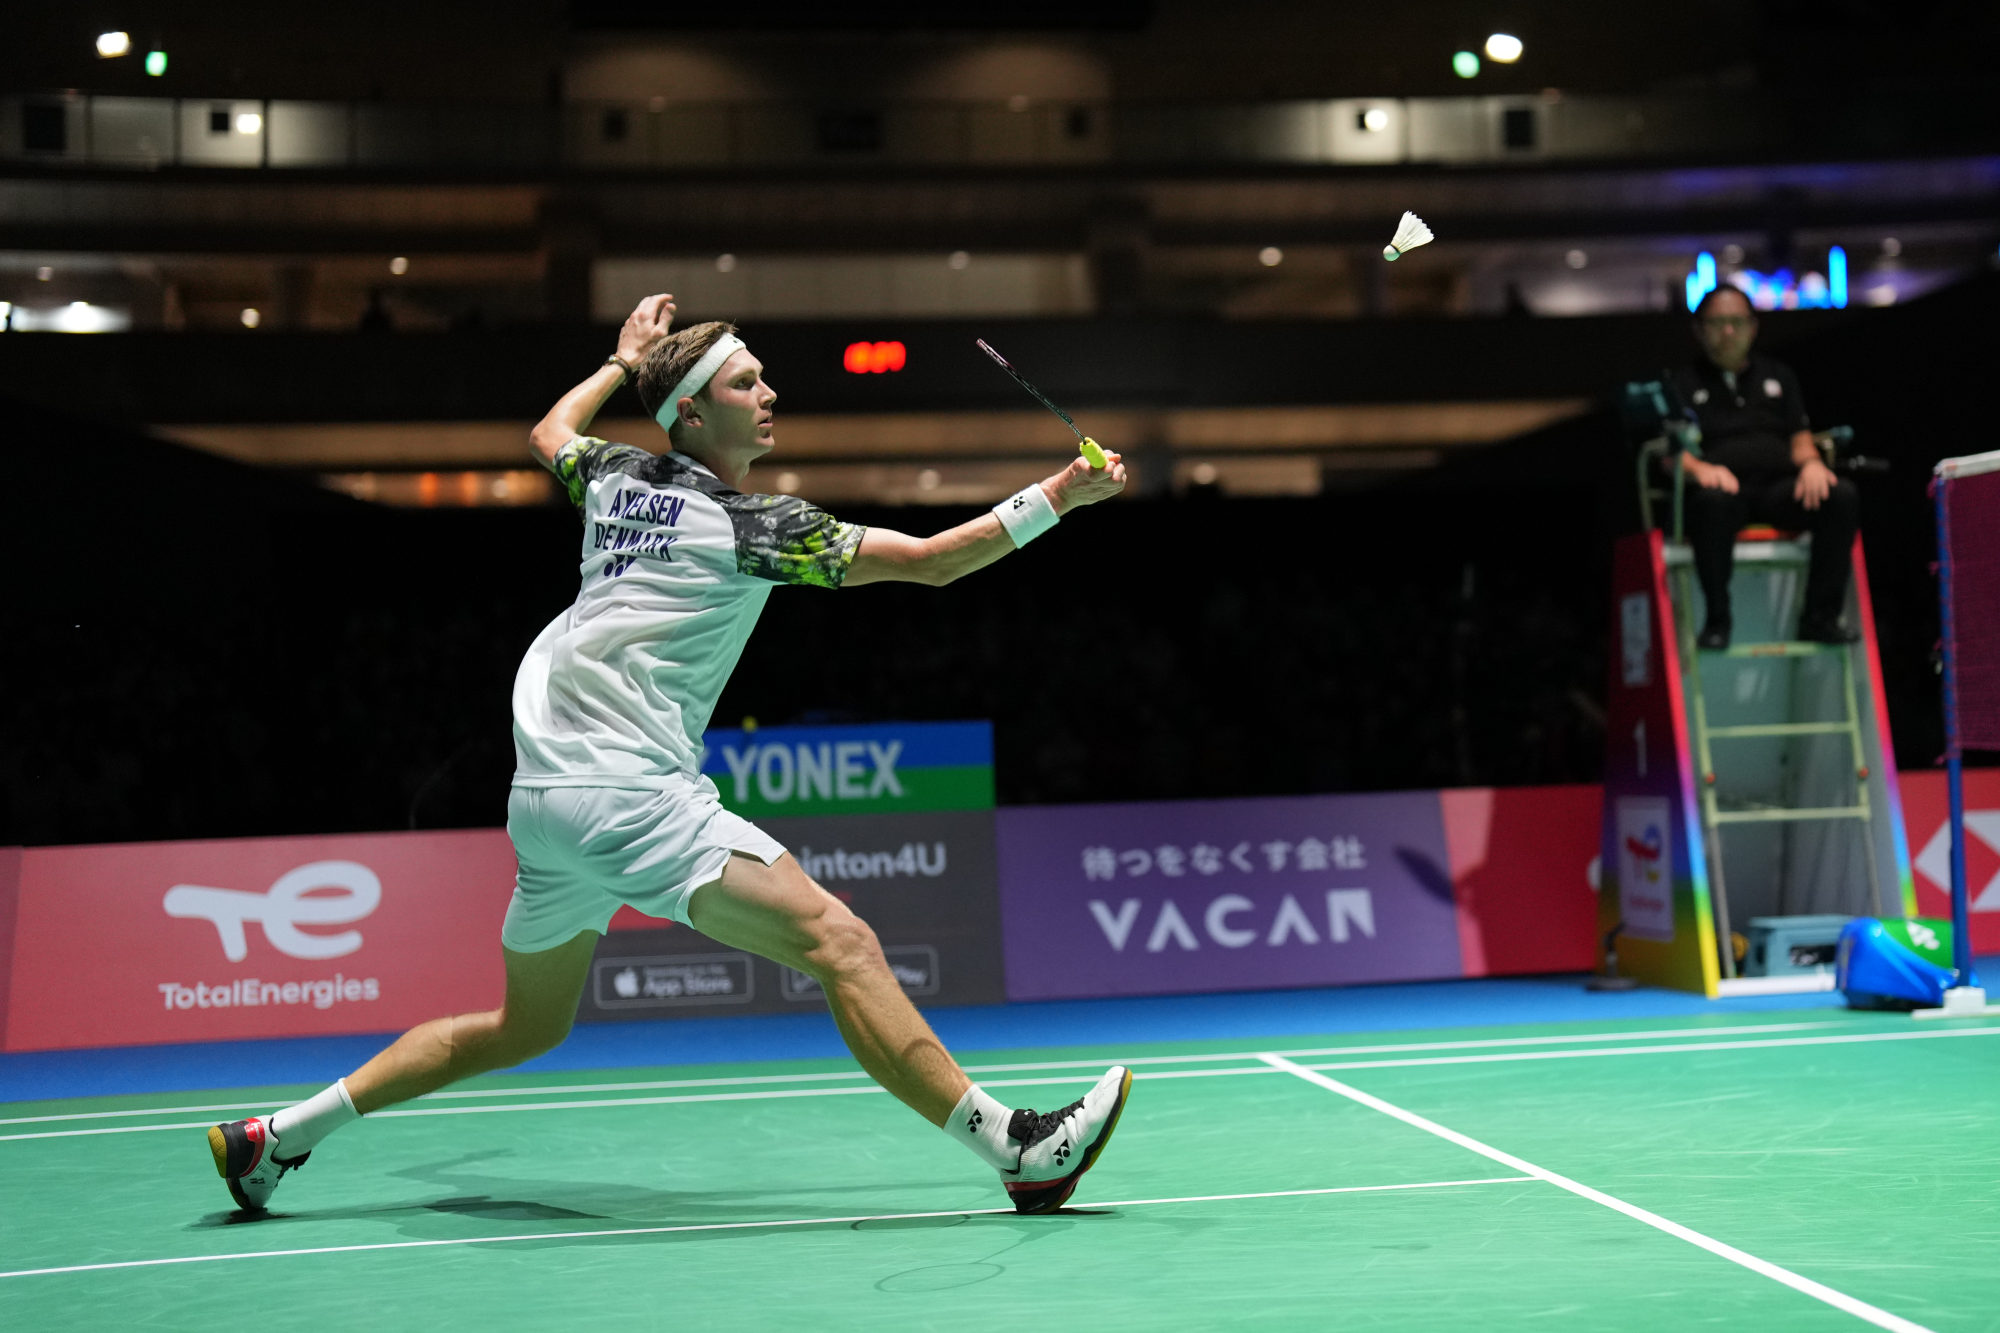 Race to Paris Olympics badminton qualification to begin in China, as